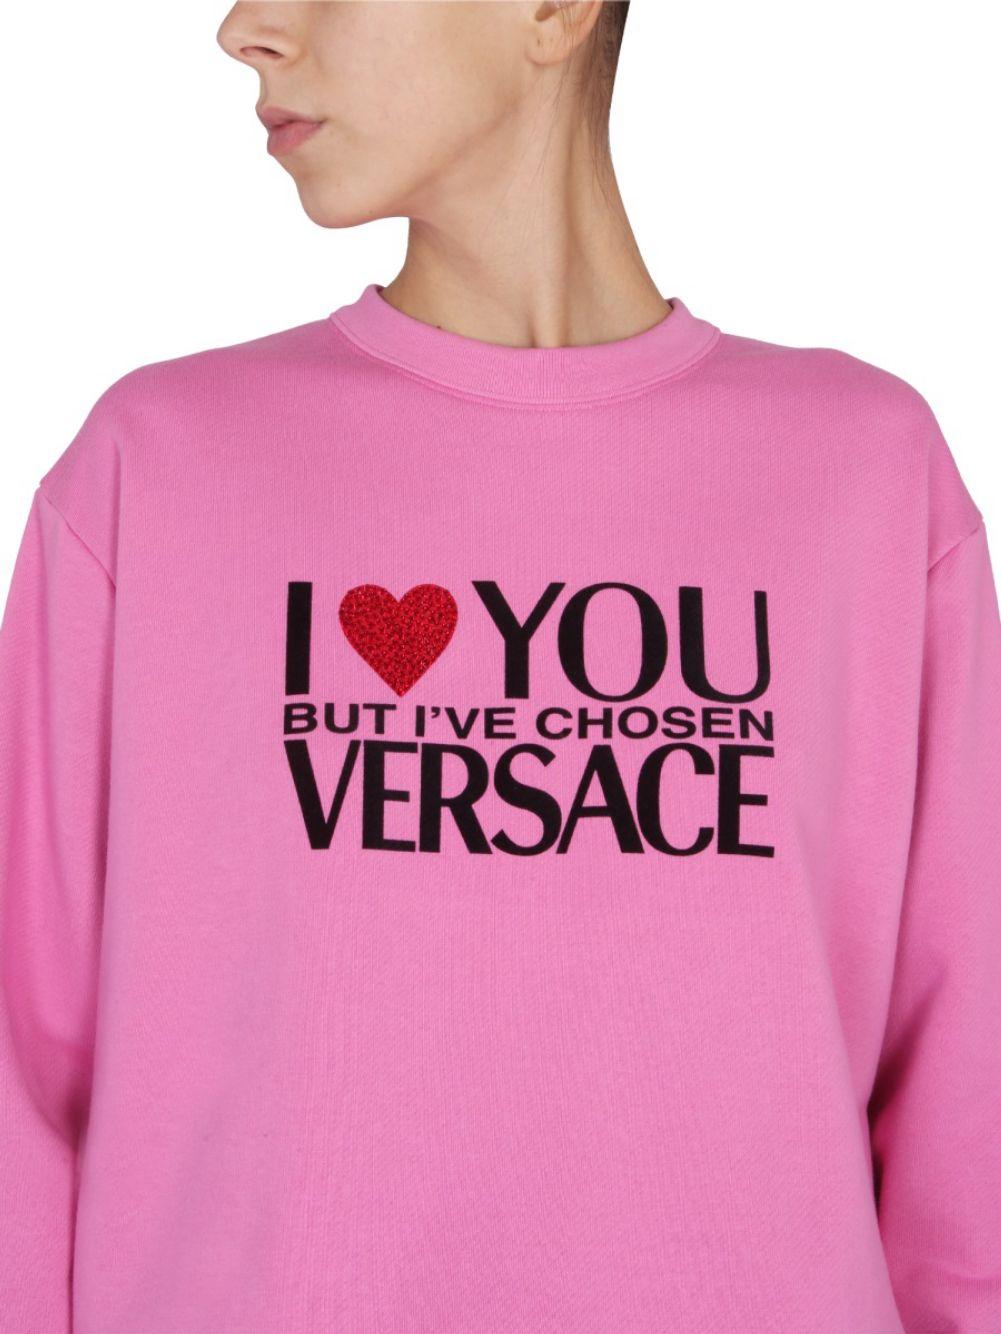 Versace Sweatshirt With I Love You Logo in Pink | Lyst